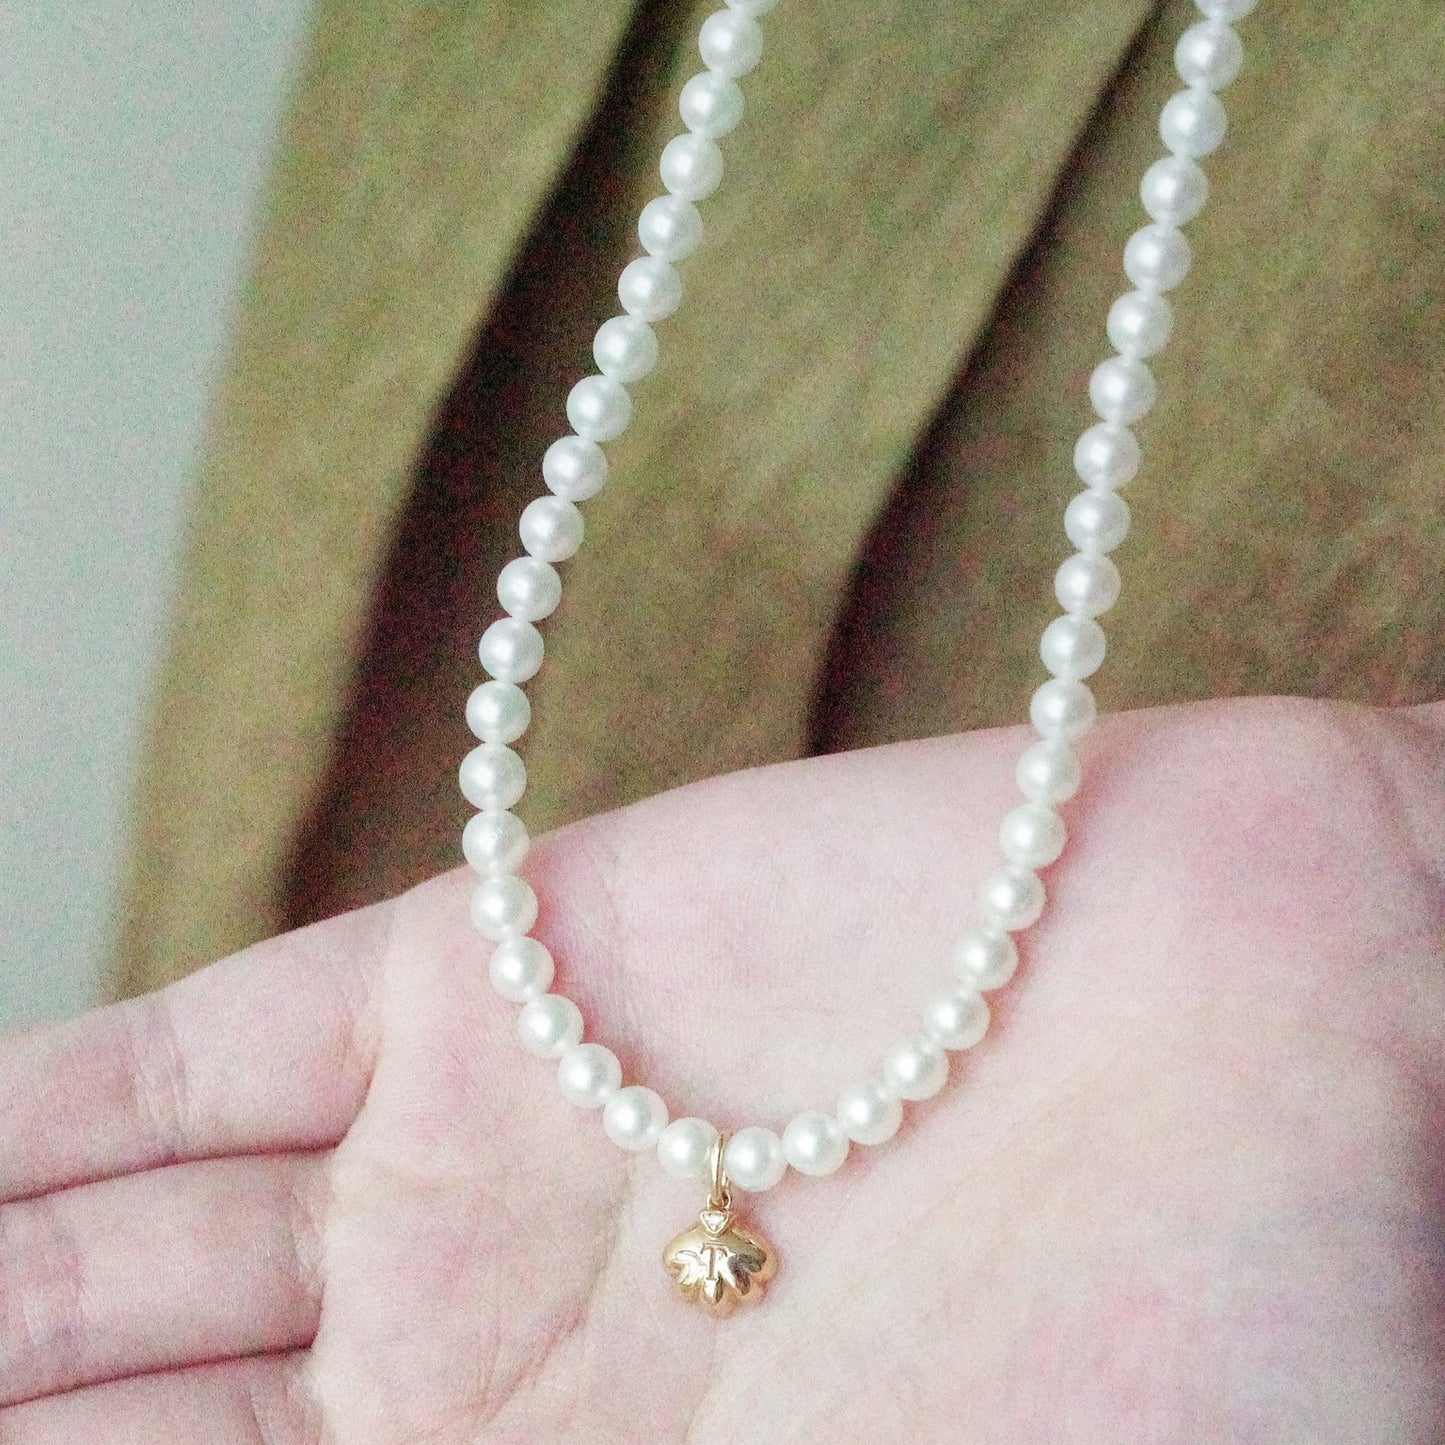 LEGACY・OCEAN--K18 Yellow Gold Akoya Pearl Toggle Clasp Necklace (5mm)